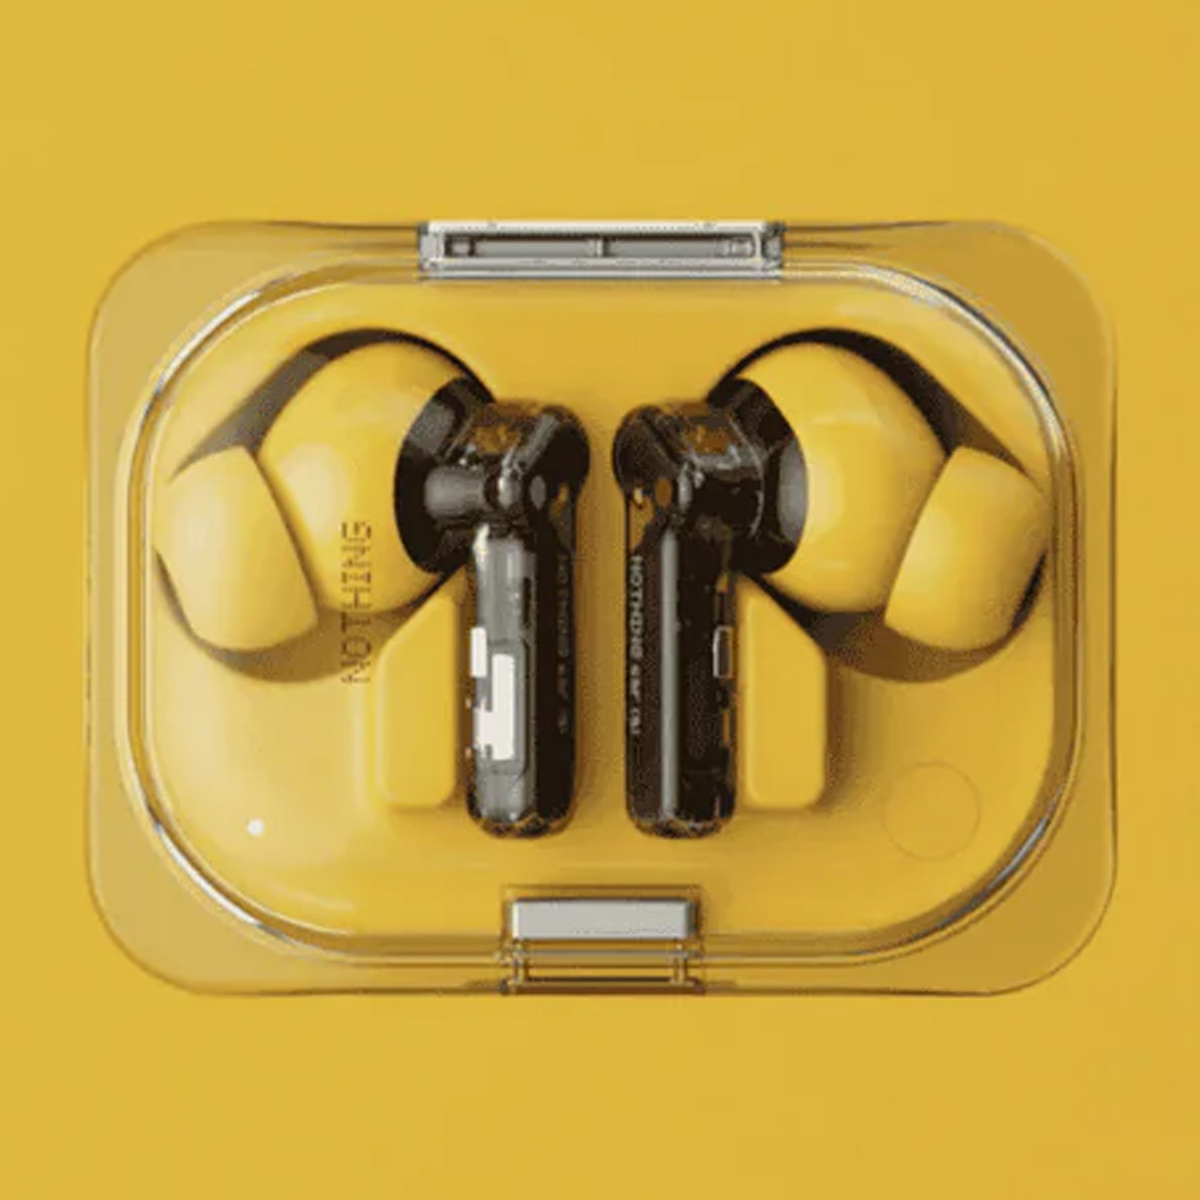 Nothing Ear(a) True Wireless Earbuds with Mic, Yellow, B162